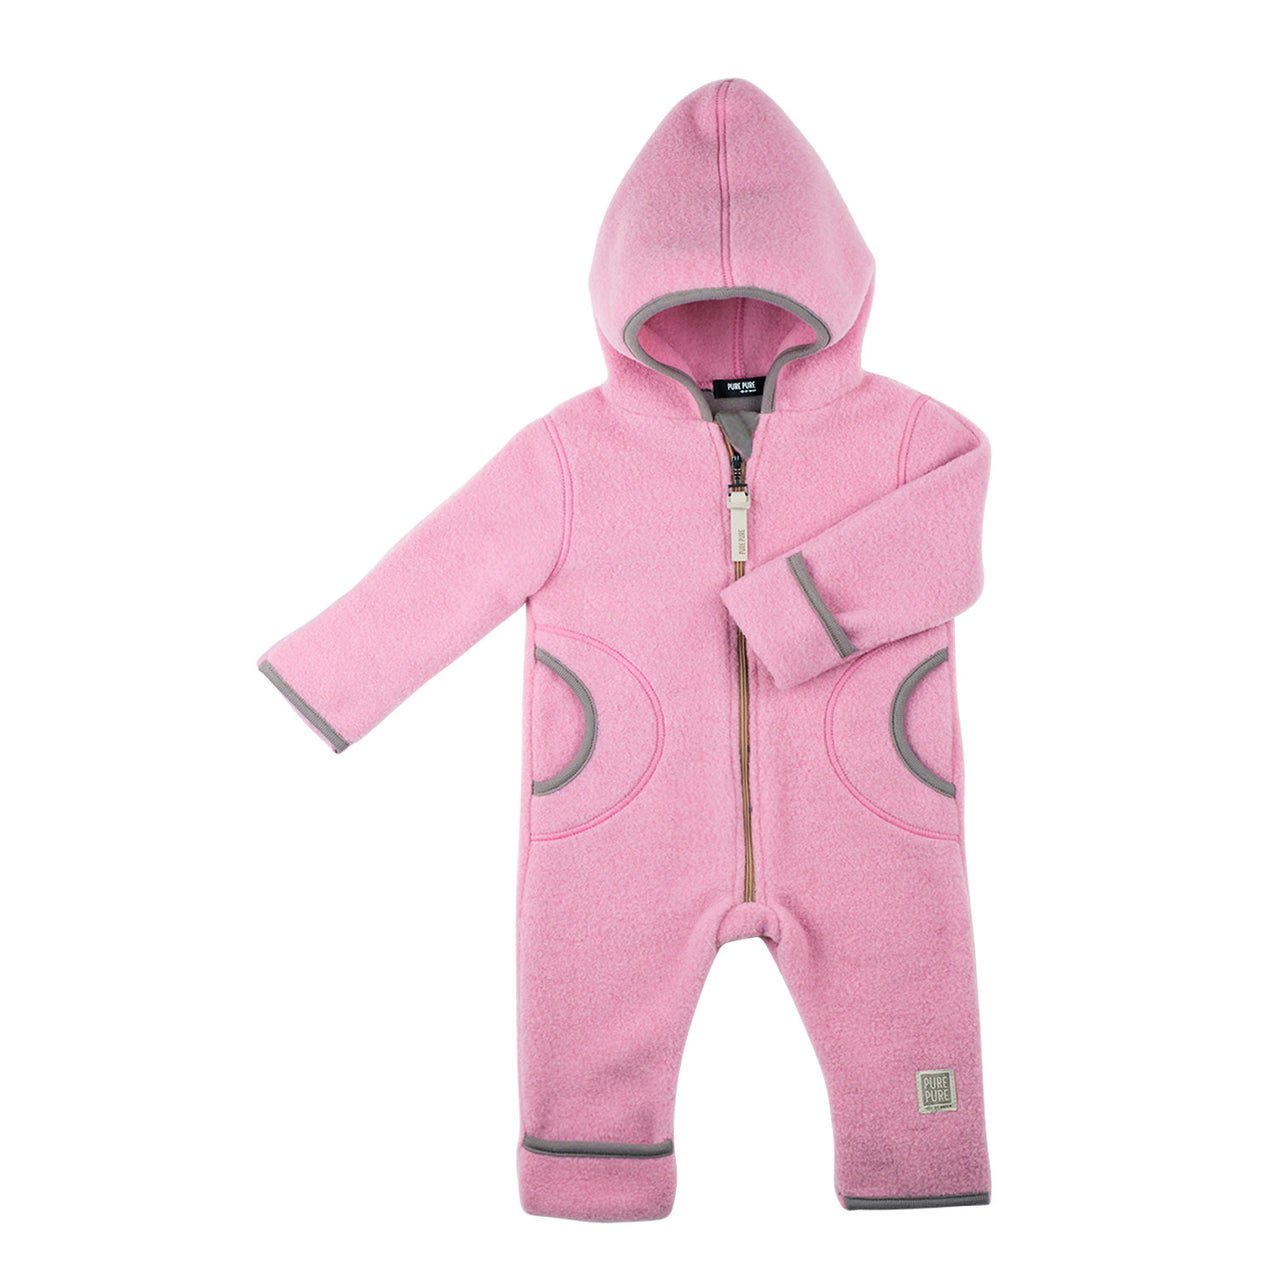 Pure Pure Woll-Fleece-Overal misty rose - Familienbande